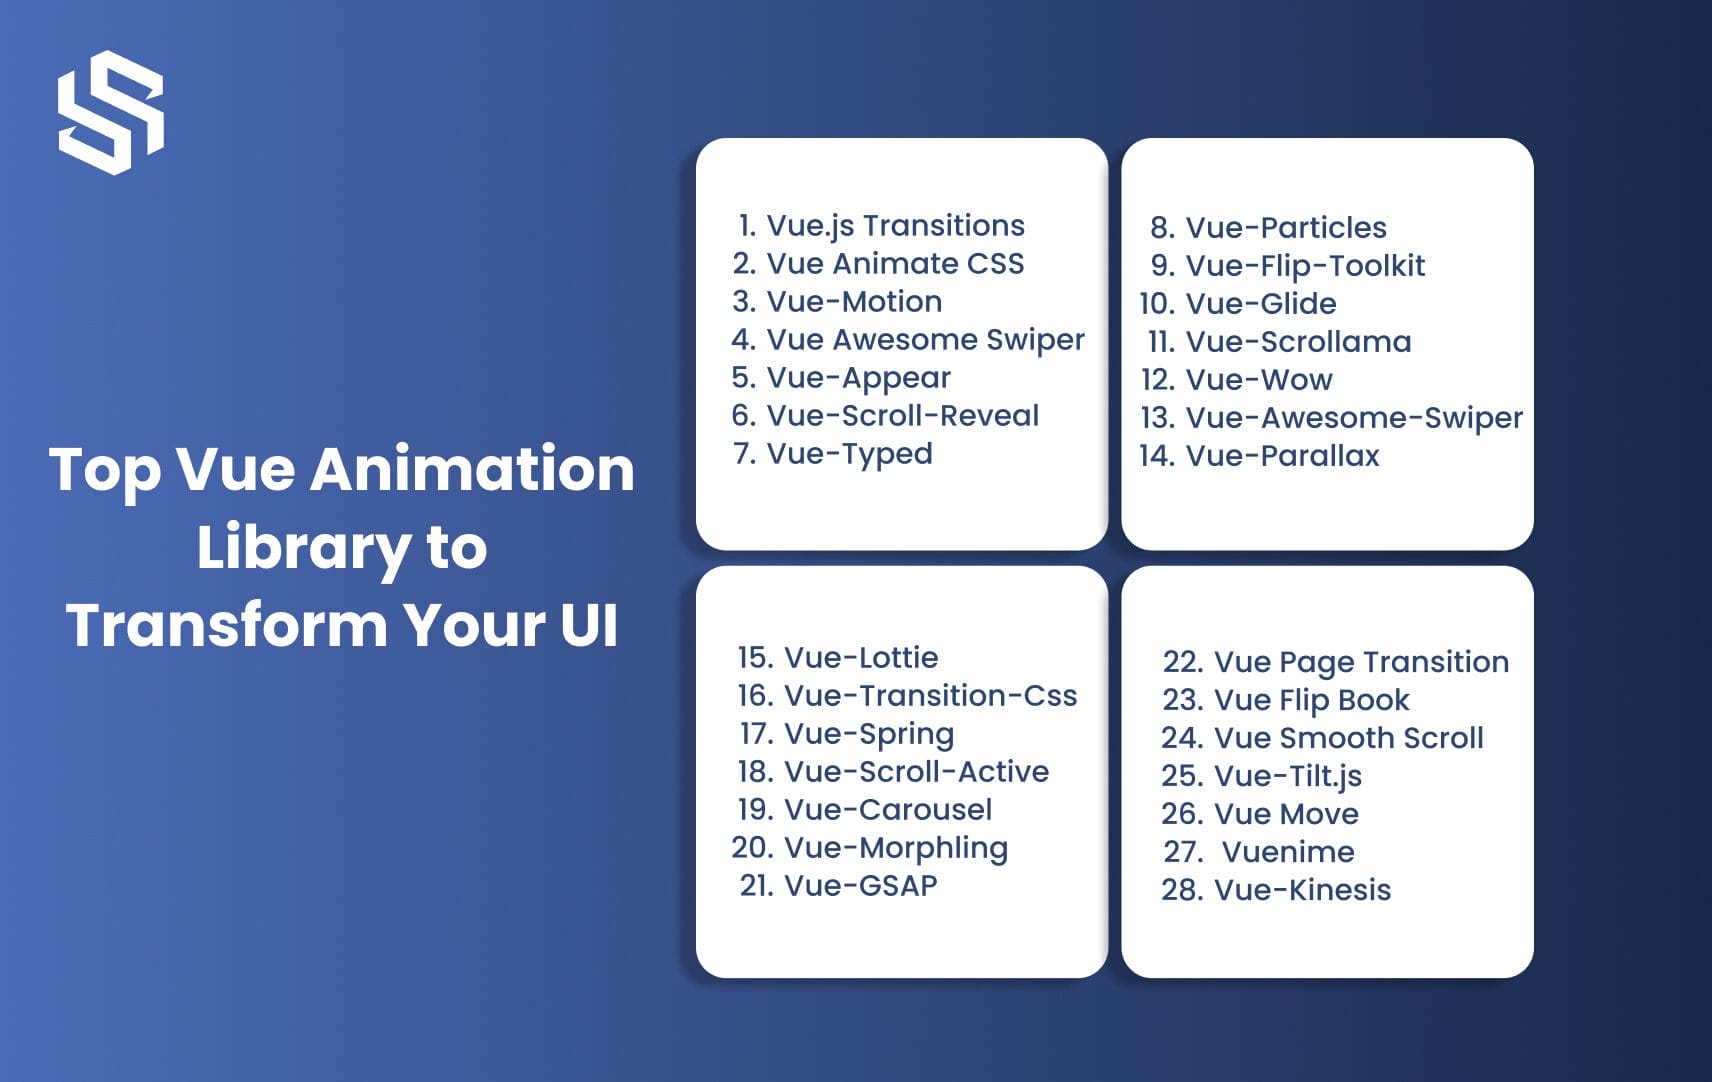 Top Vue Animation Library to Transform Your UI